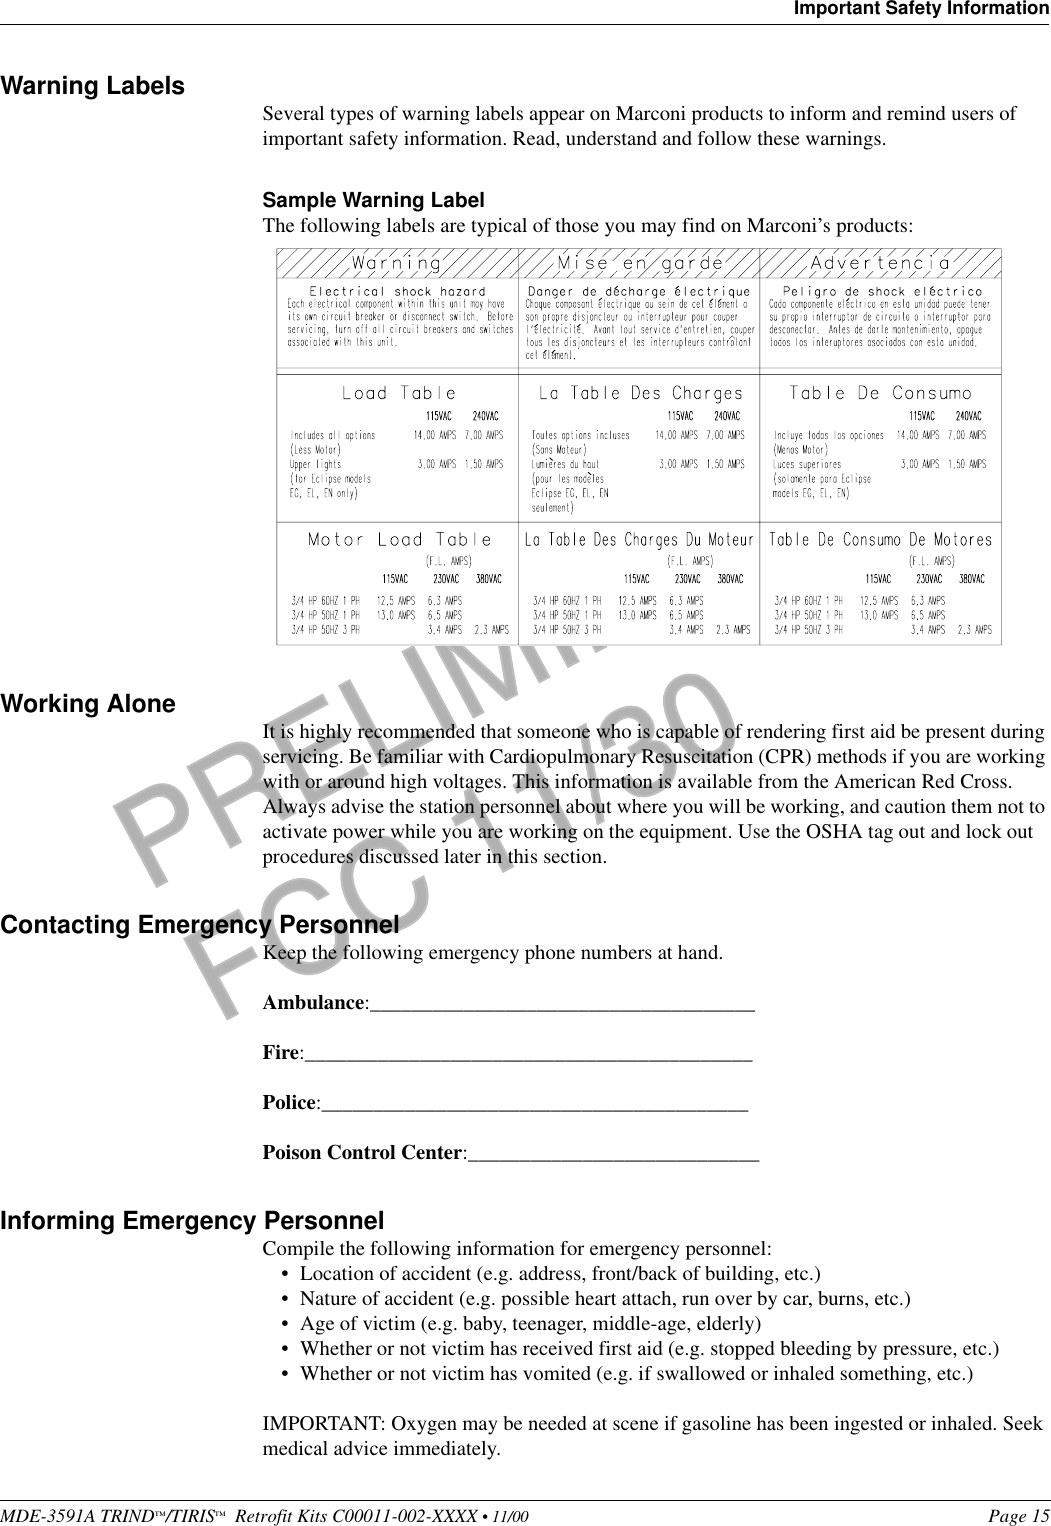 MDE-3591A TRIND™/TIRIS™  Retrofit Kits C00011-002-XXXX • 11/00 Page 15Important Safety InformationPRELIMINARYFCC 11/30Warning Labels Several types of warning labels appear on Marconi products to inform and remind users of important safety information. Read, understand and follow these warnings. Sample Warning LabelThe following labels are typical of those you may find on Marconi’s products: Working Alone It is highly recommended that someone who is capable of rendering first aid be present during servicing. Be familiar with Cardiopulmonary Resuscitation (CPR) methods if you are working with or around high voltages. This information is available from the American Red Cross. Always advise the station personnel about where you will be working, and caution them not to activate power while you are working on the equipment. Use the OSHA tag out and lock out procedures discussed later in this section.Contacting Emergency PersonnelKeep the following emergency phone numbers at hand. Ambulance:_____________________________________Fire:___________________________________________Police:_________________________________________Poison Control Center:____________________________Informing Emergency PersonnelCompile the following information for emergency personnel:•Location of accident (e.g. address, front/back of building, etc.)•Nature of accident (e.g. possible heart attach, run over by car, burns, etc.)•Age of victim (e.g. baby, teenager, middle-age, elderly)•Whether or not victim has received first aid (e.g. stopped bleeding by pressure, etc.)•Whether or not victim has vomited (e.g. if swallowed or inhaled something, etc.)IMPORTANT: Oxygen may be needed at scene if gasoline has been ingested or inhaled. Seek medical advice immediately.